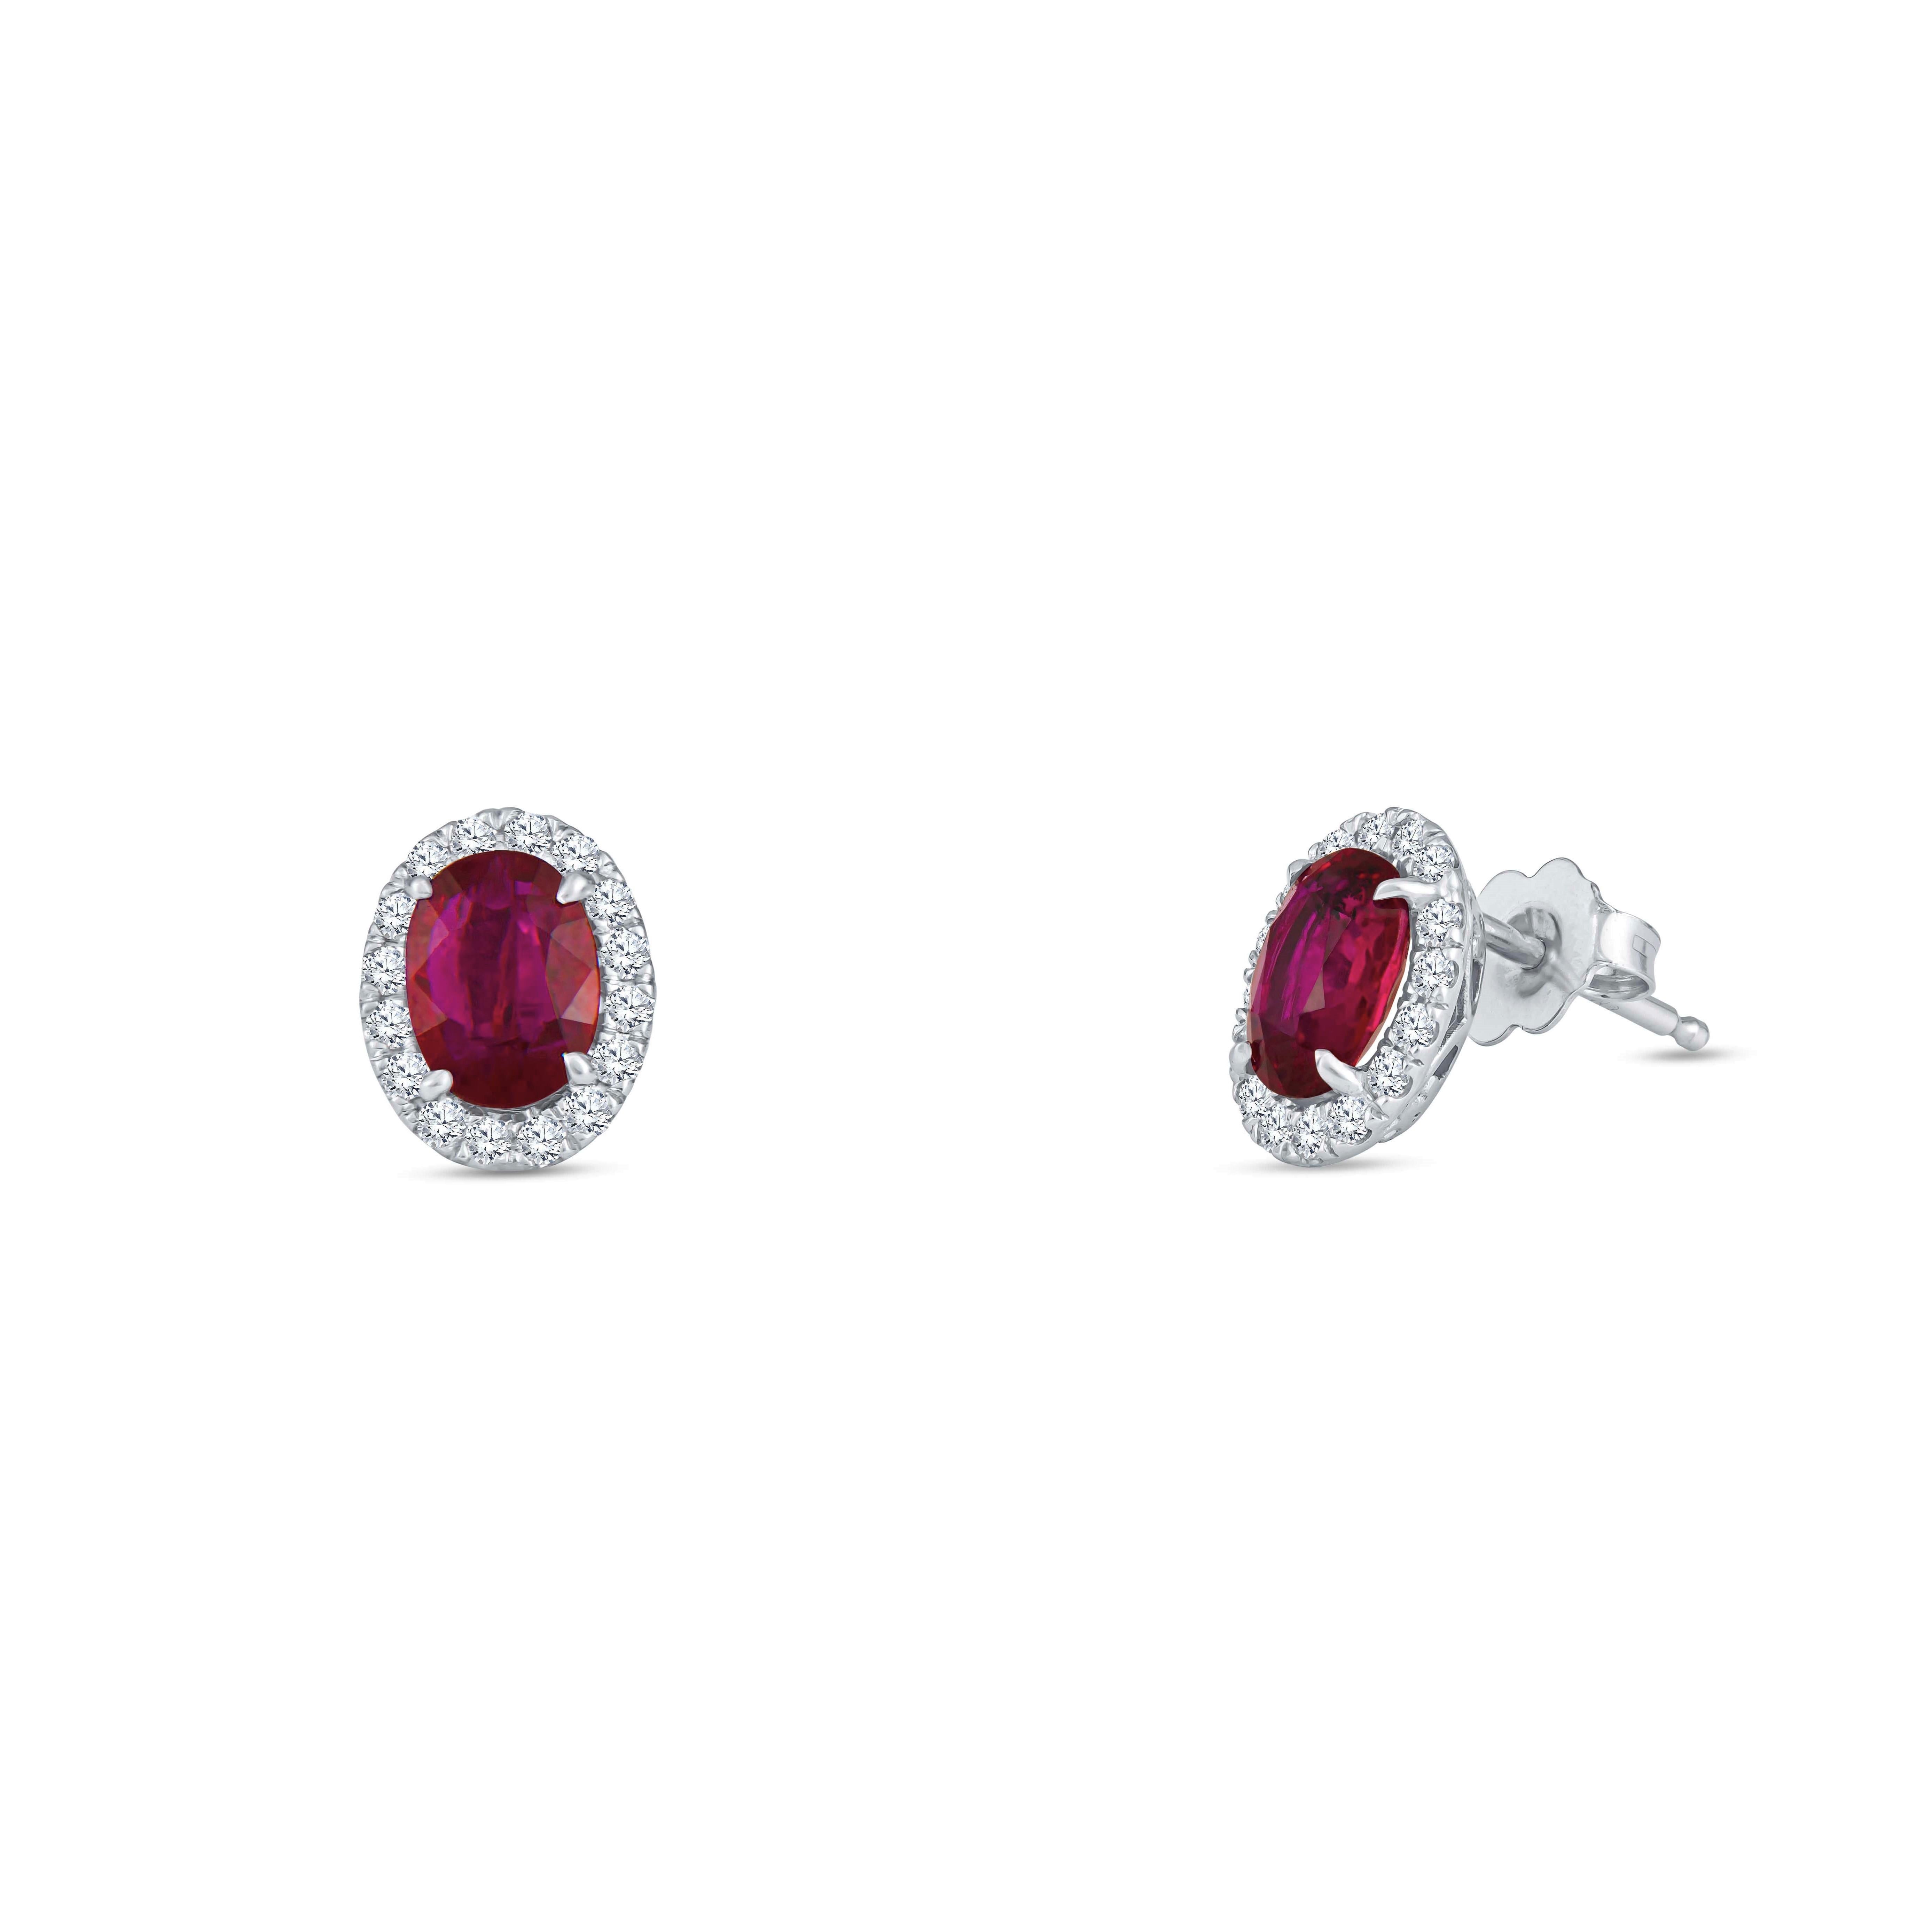 Stunning 0.32 carats round brilliant cut diamond halo stud earrings that beautifully surround two perfectly matched natural oval rubies with 1.90 carats total weight. 

Diamond quality: G-H color, VS2-SI1 clarity